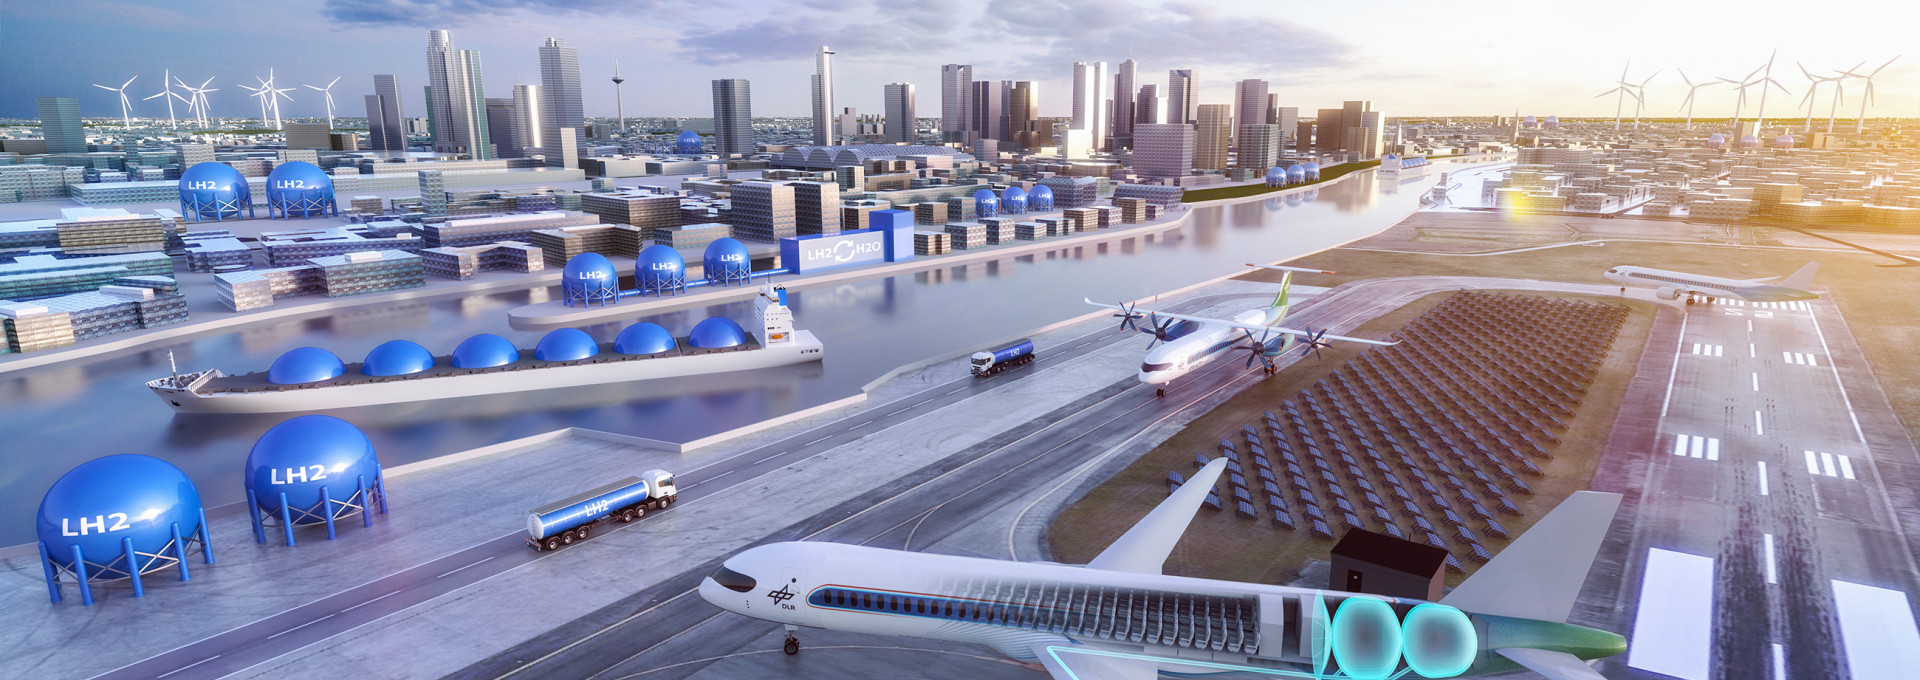 DLR vision of a future hydrogen economy in aviation (digital image)